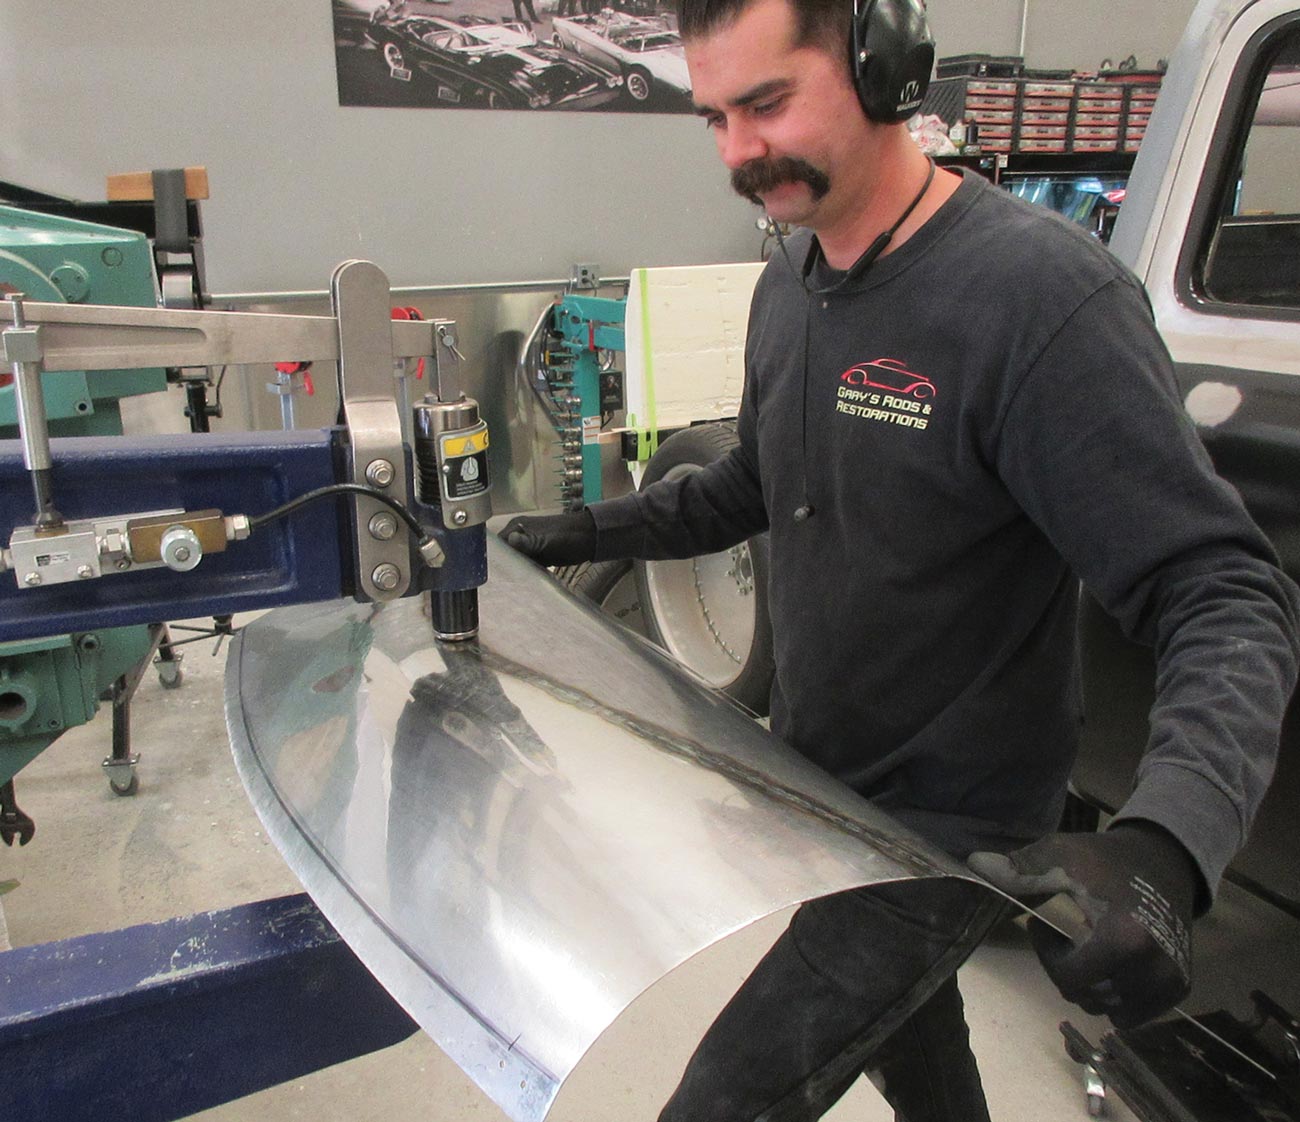 after finish welding, the mechanic smooths the welded area with a pneumatic planishing hammer